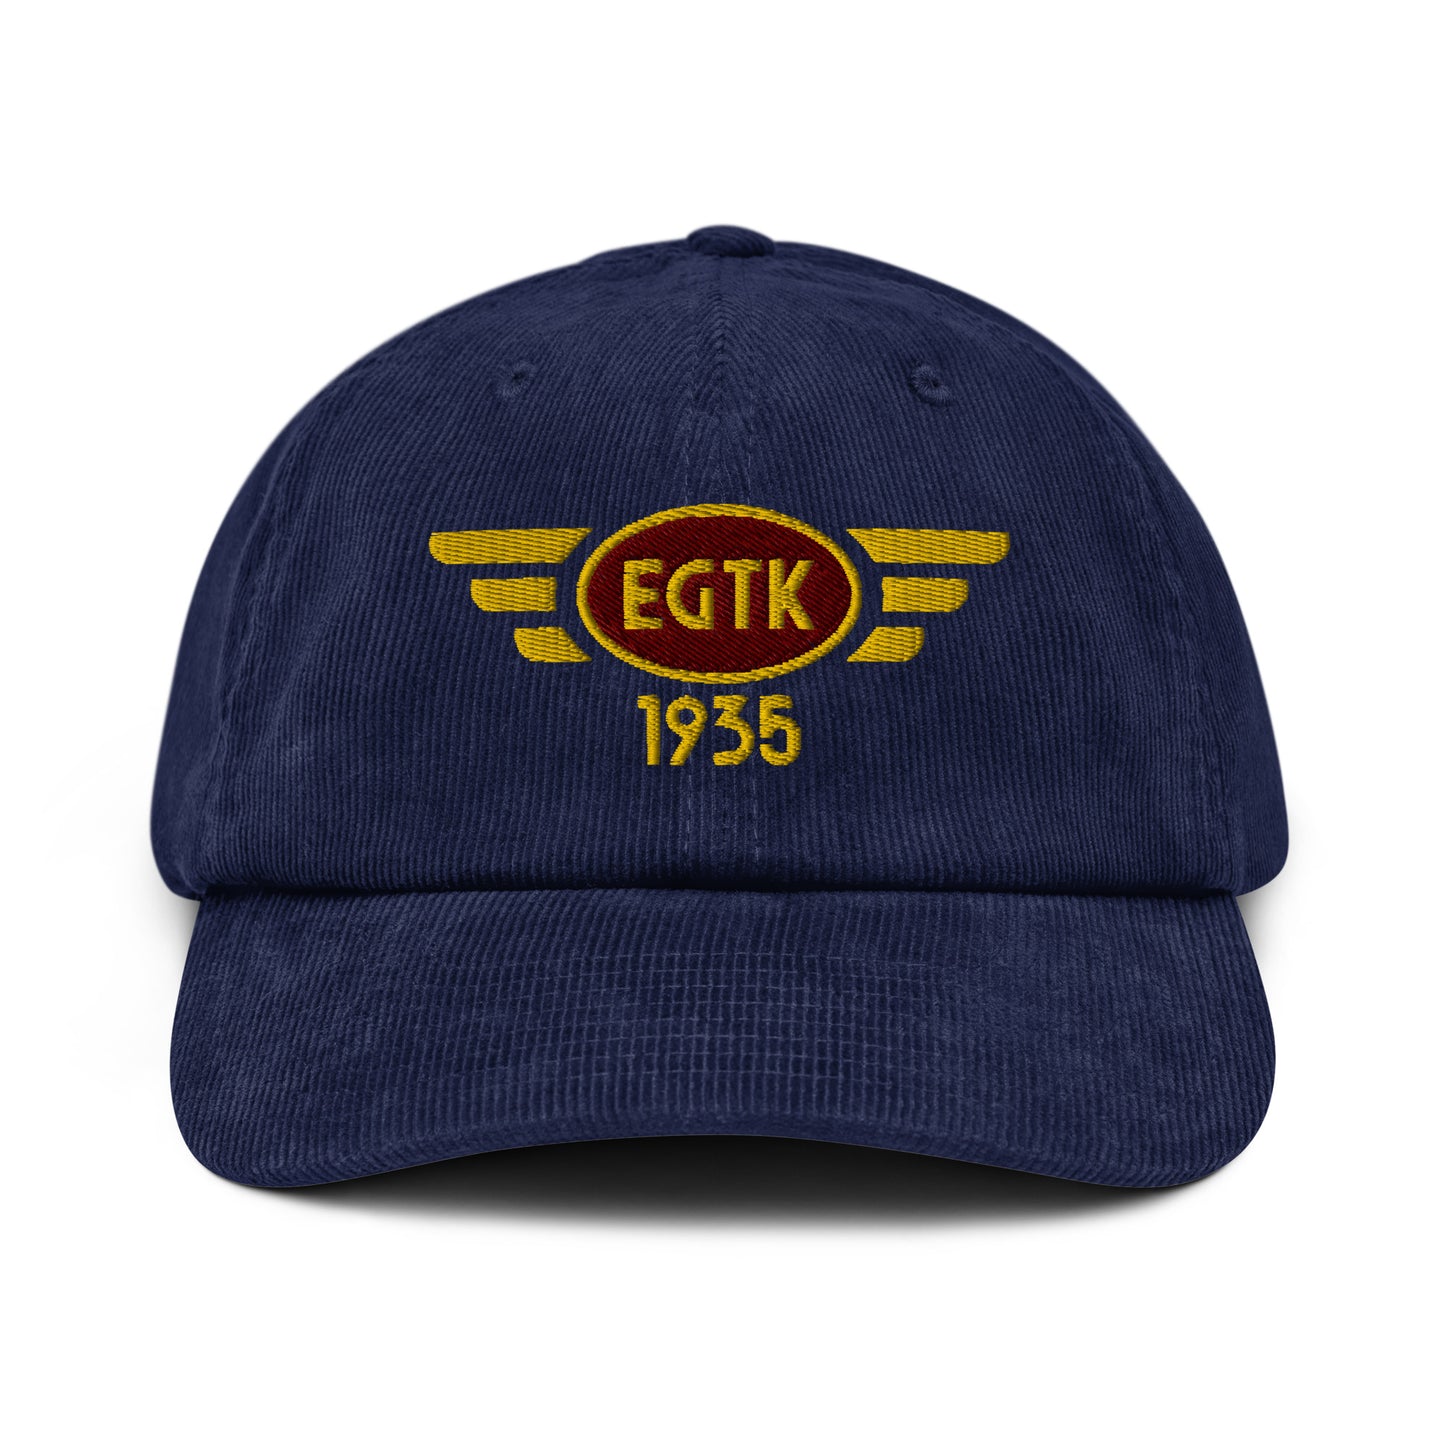 Oxford navy blue coloured corduroy baseball cap with embroidered vintage style aviation logo for Kidlington Airport.